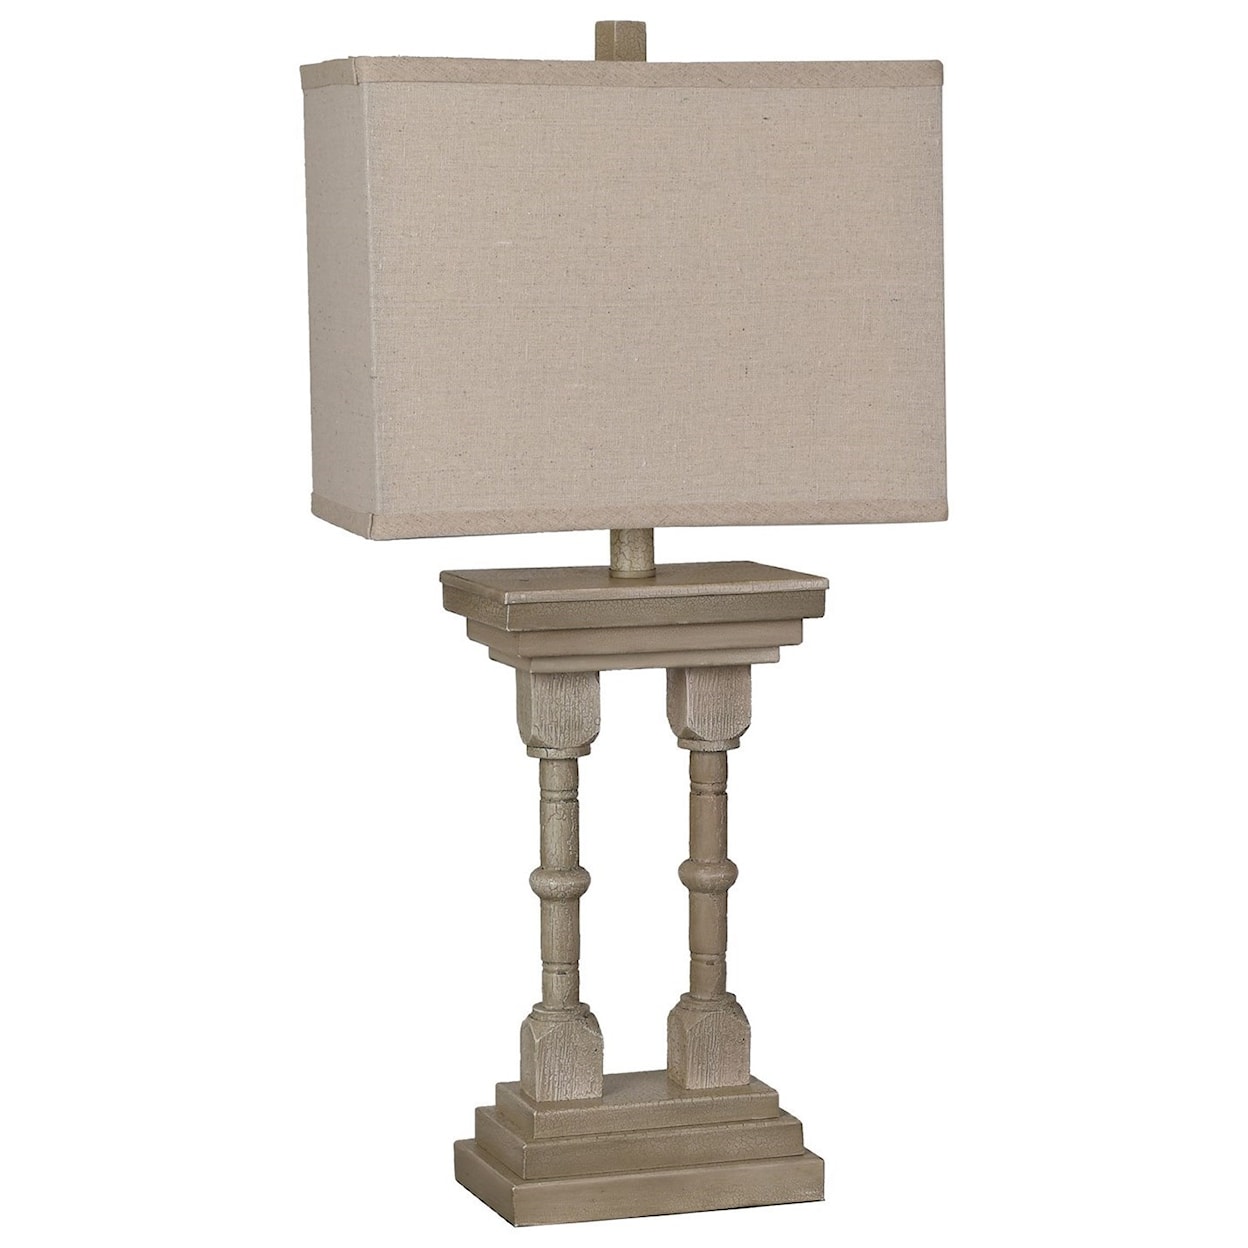 Crestview Collection Lighting Wooden Column Table Lamp